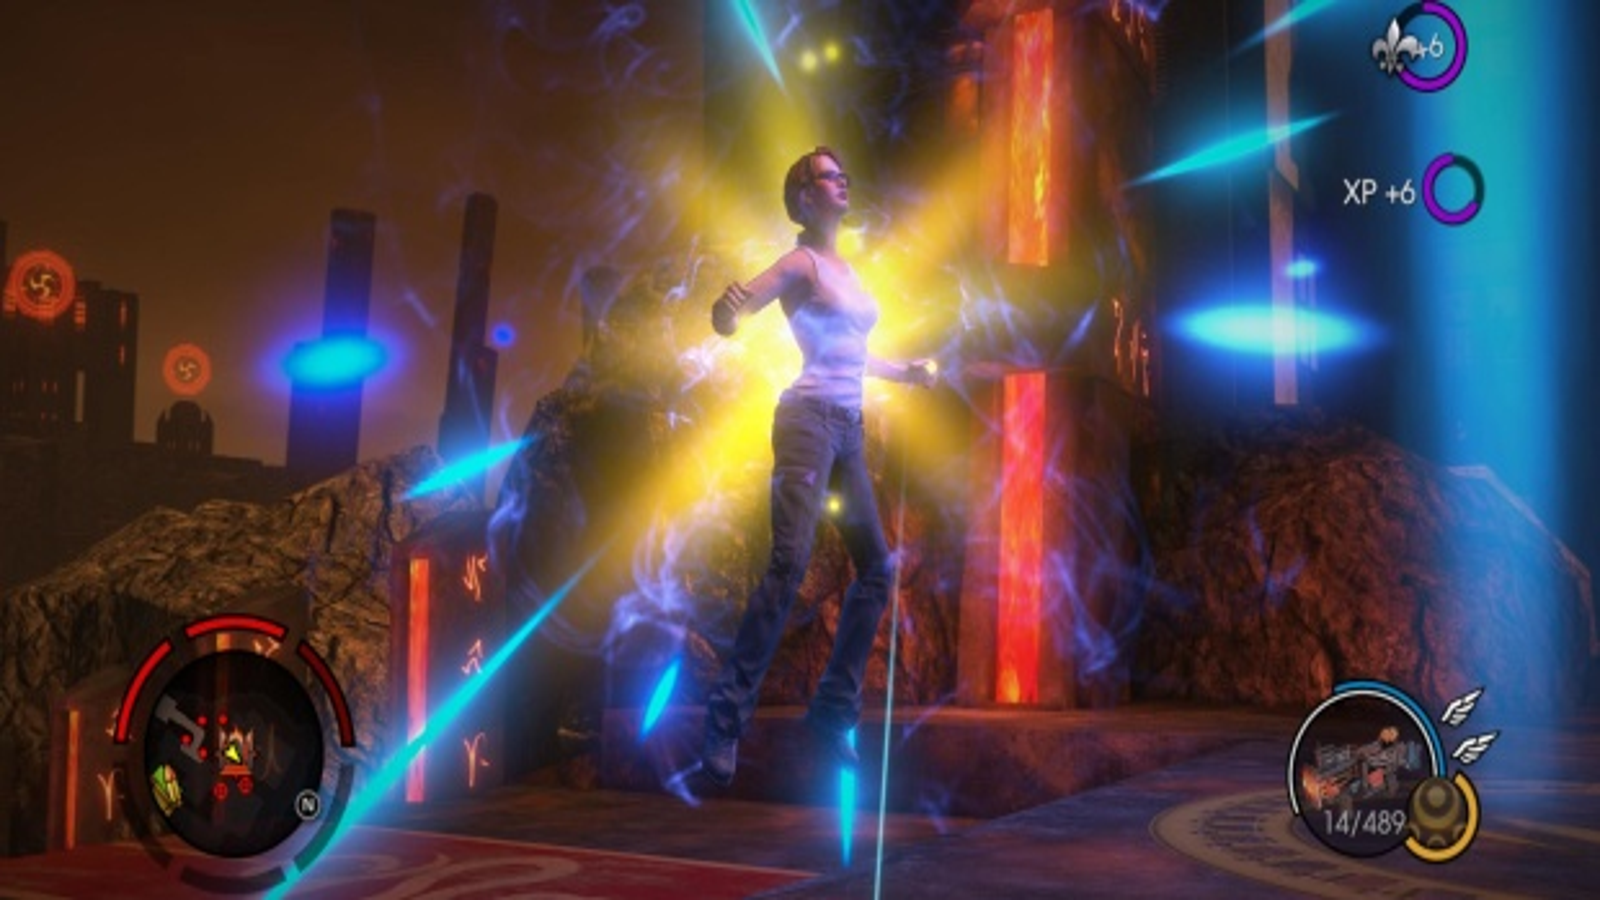 Saints Row: Gat Out of Hell Musical Released by Deep Silver